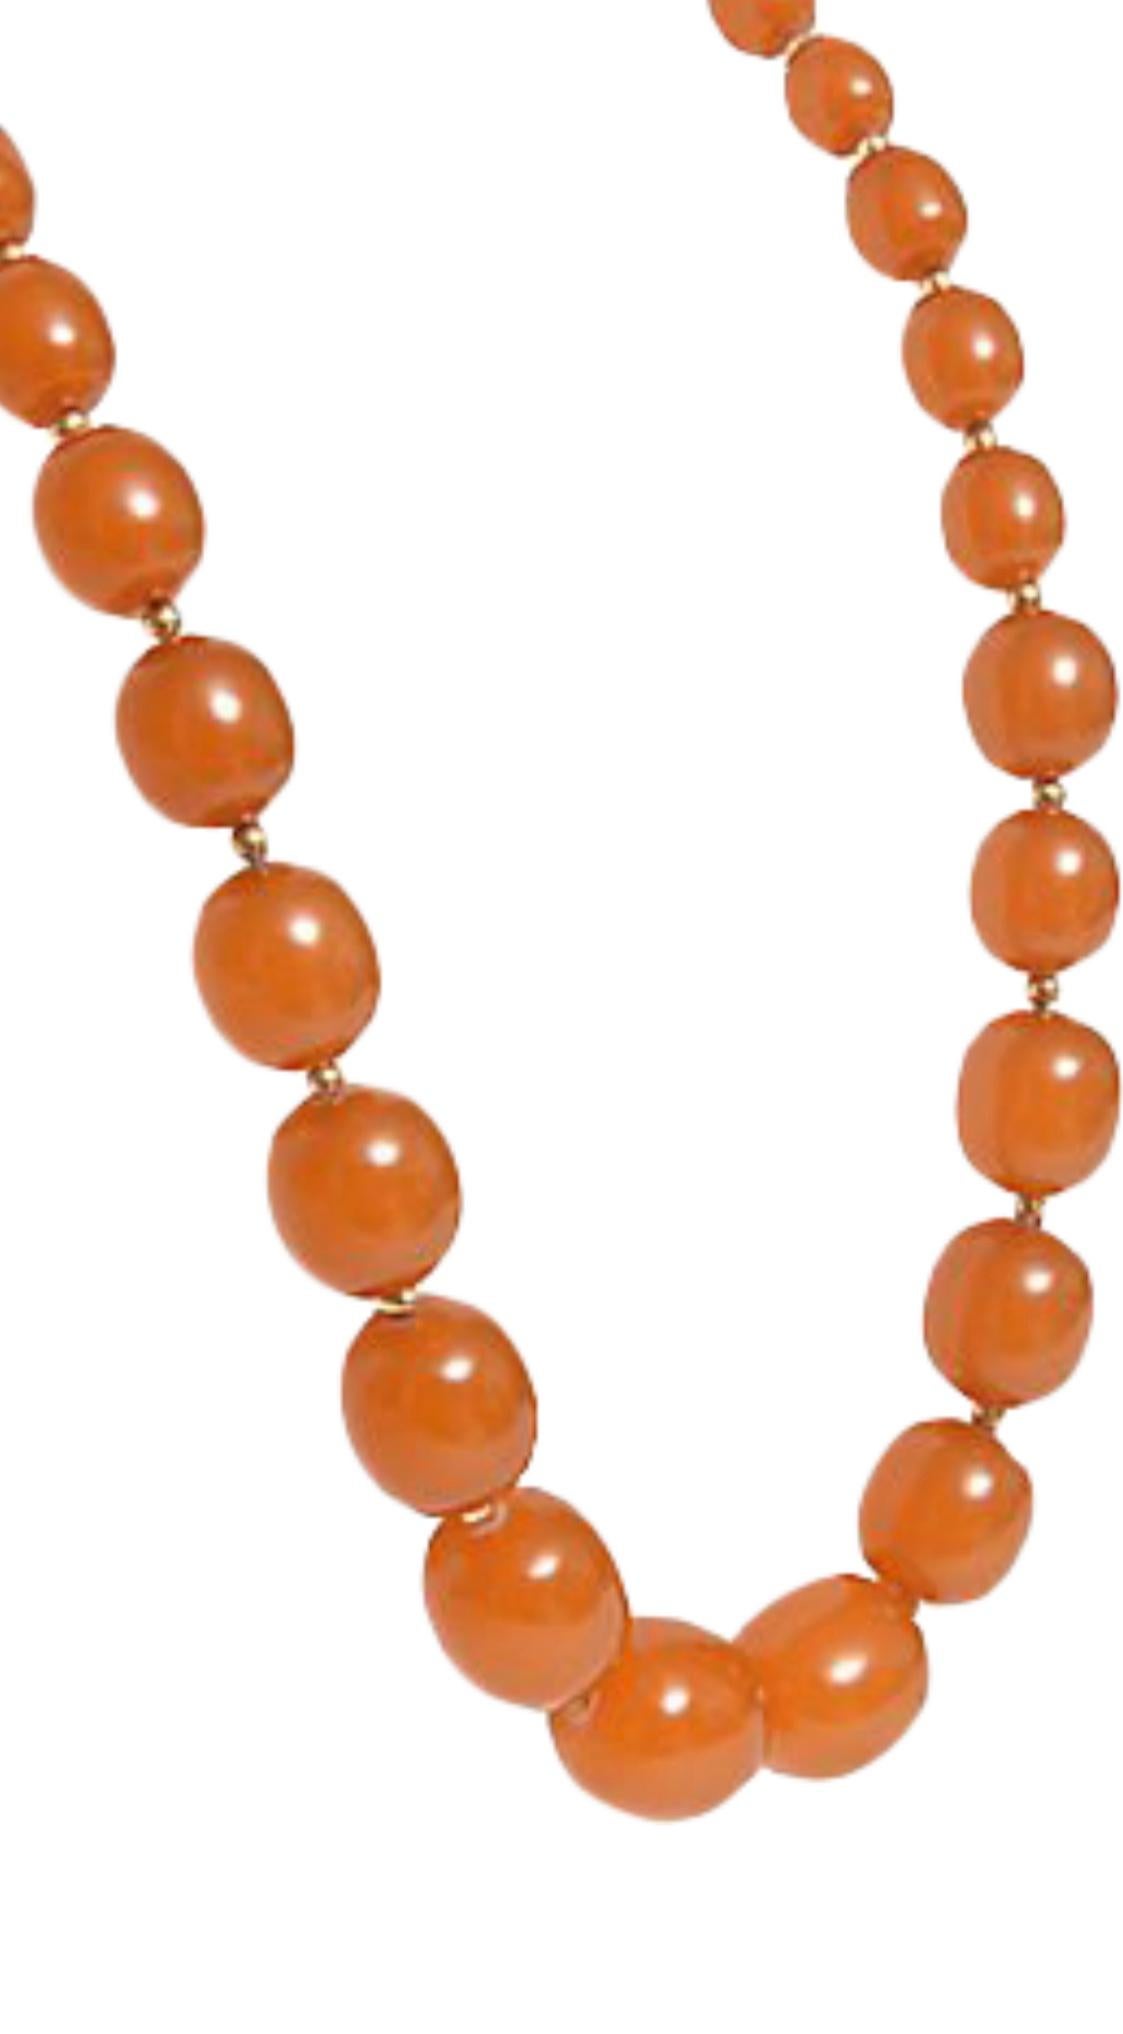 Strand of graduated amber beads interspersed with 14K gold beads. Largest bead is approximately 21mm; smallest bead is 8.90mm. Gold beads: 3.8mm. Claspless.